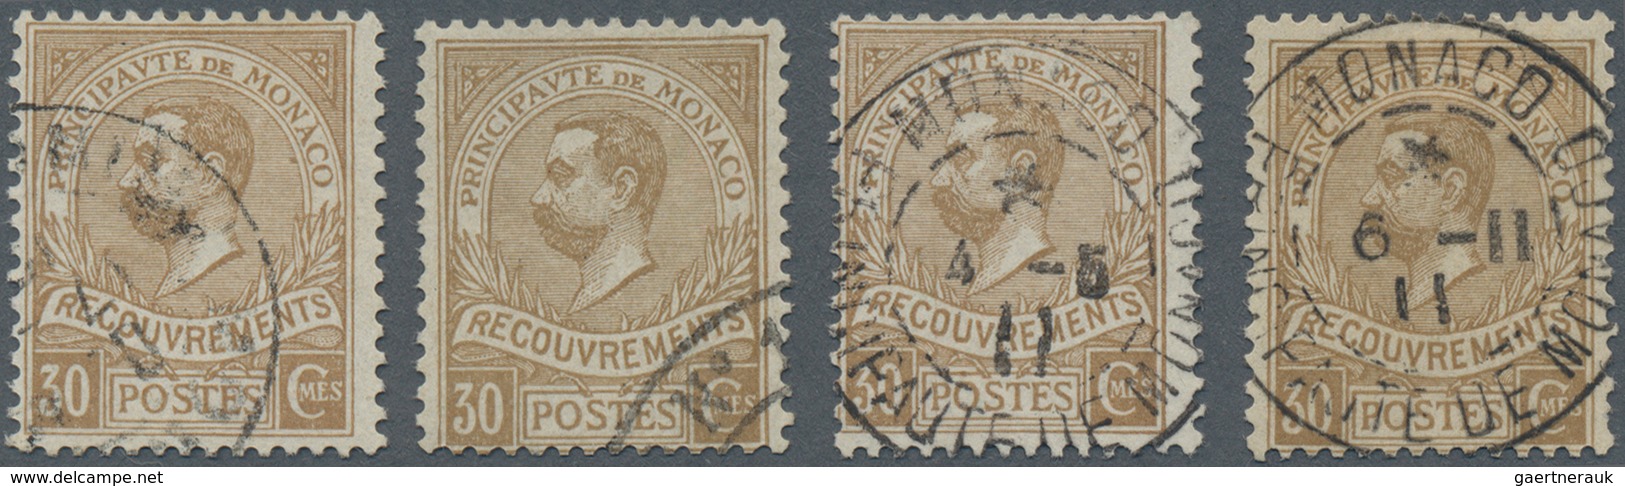 Monaco - Portomarken: 1911, Postage Due 30c. Pale Brown Small Group With Four Fine Used Copies Of Th - Postage Due